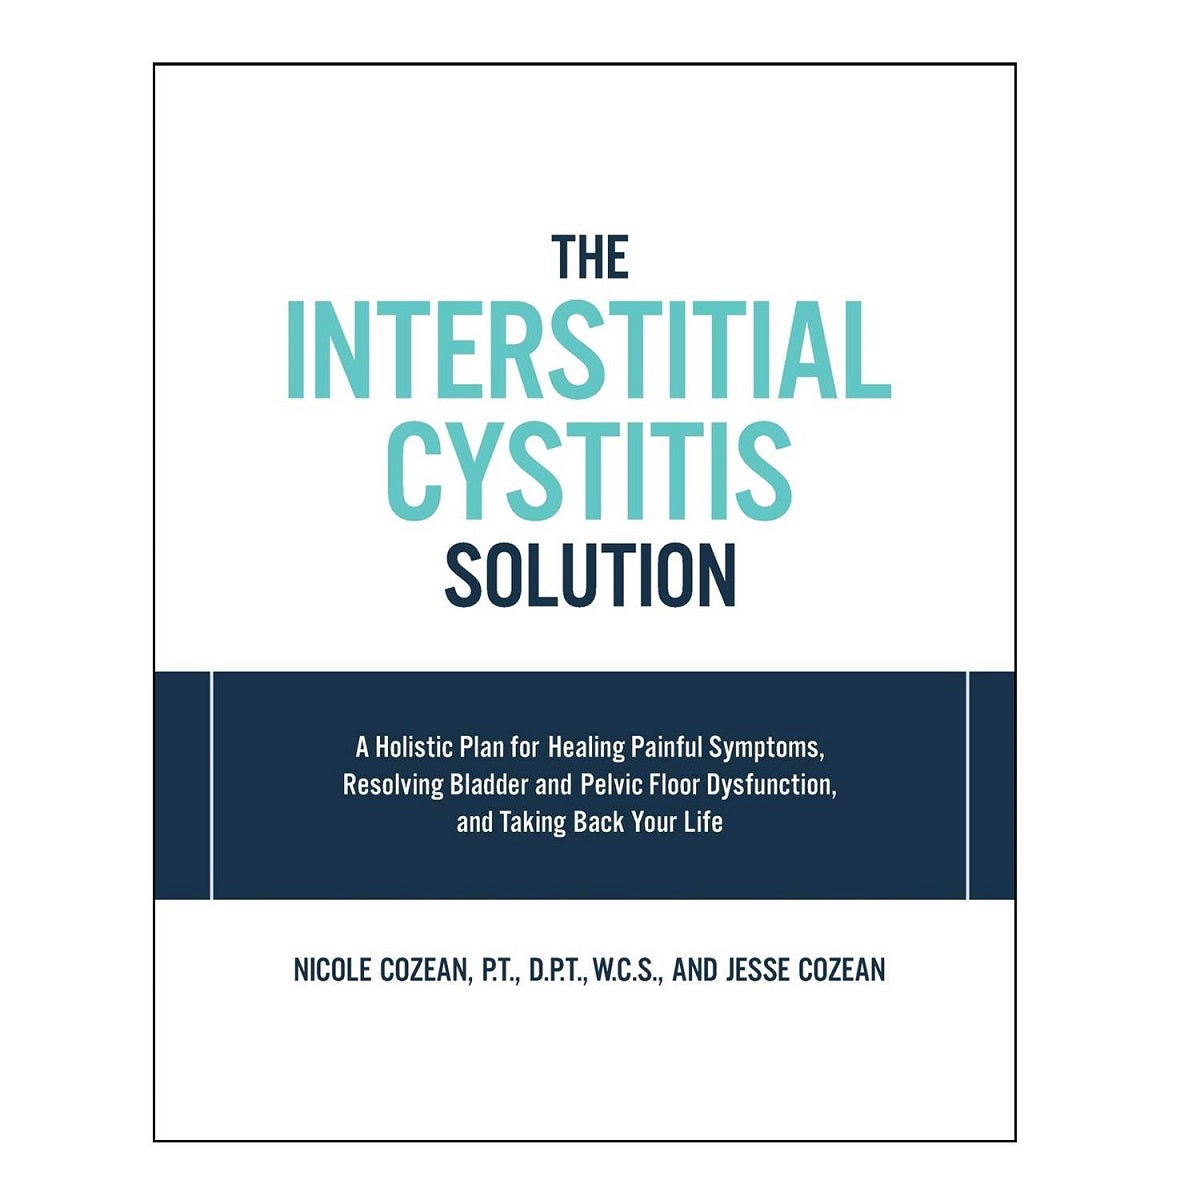 The Book "The Interstitial Cystitis Solution" by Nicole and Jesse Cozean